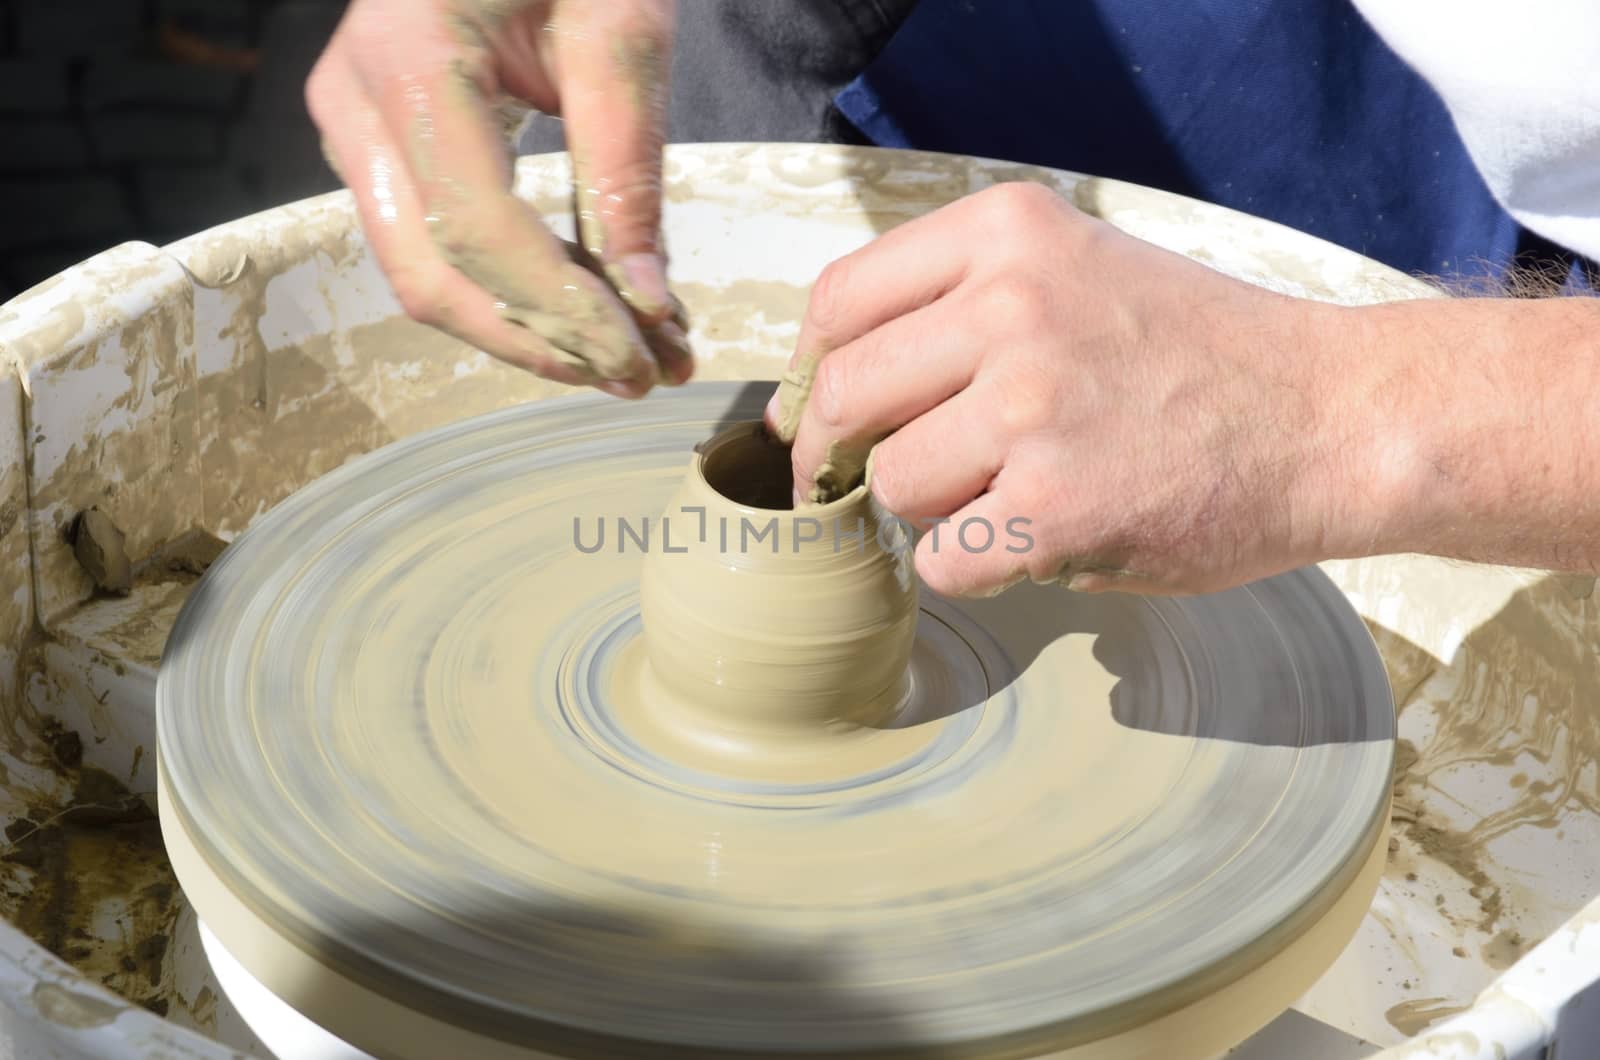 Pot being made on potting wheel